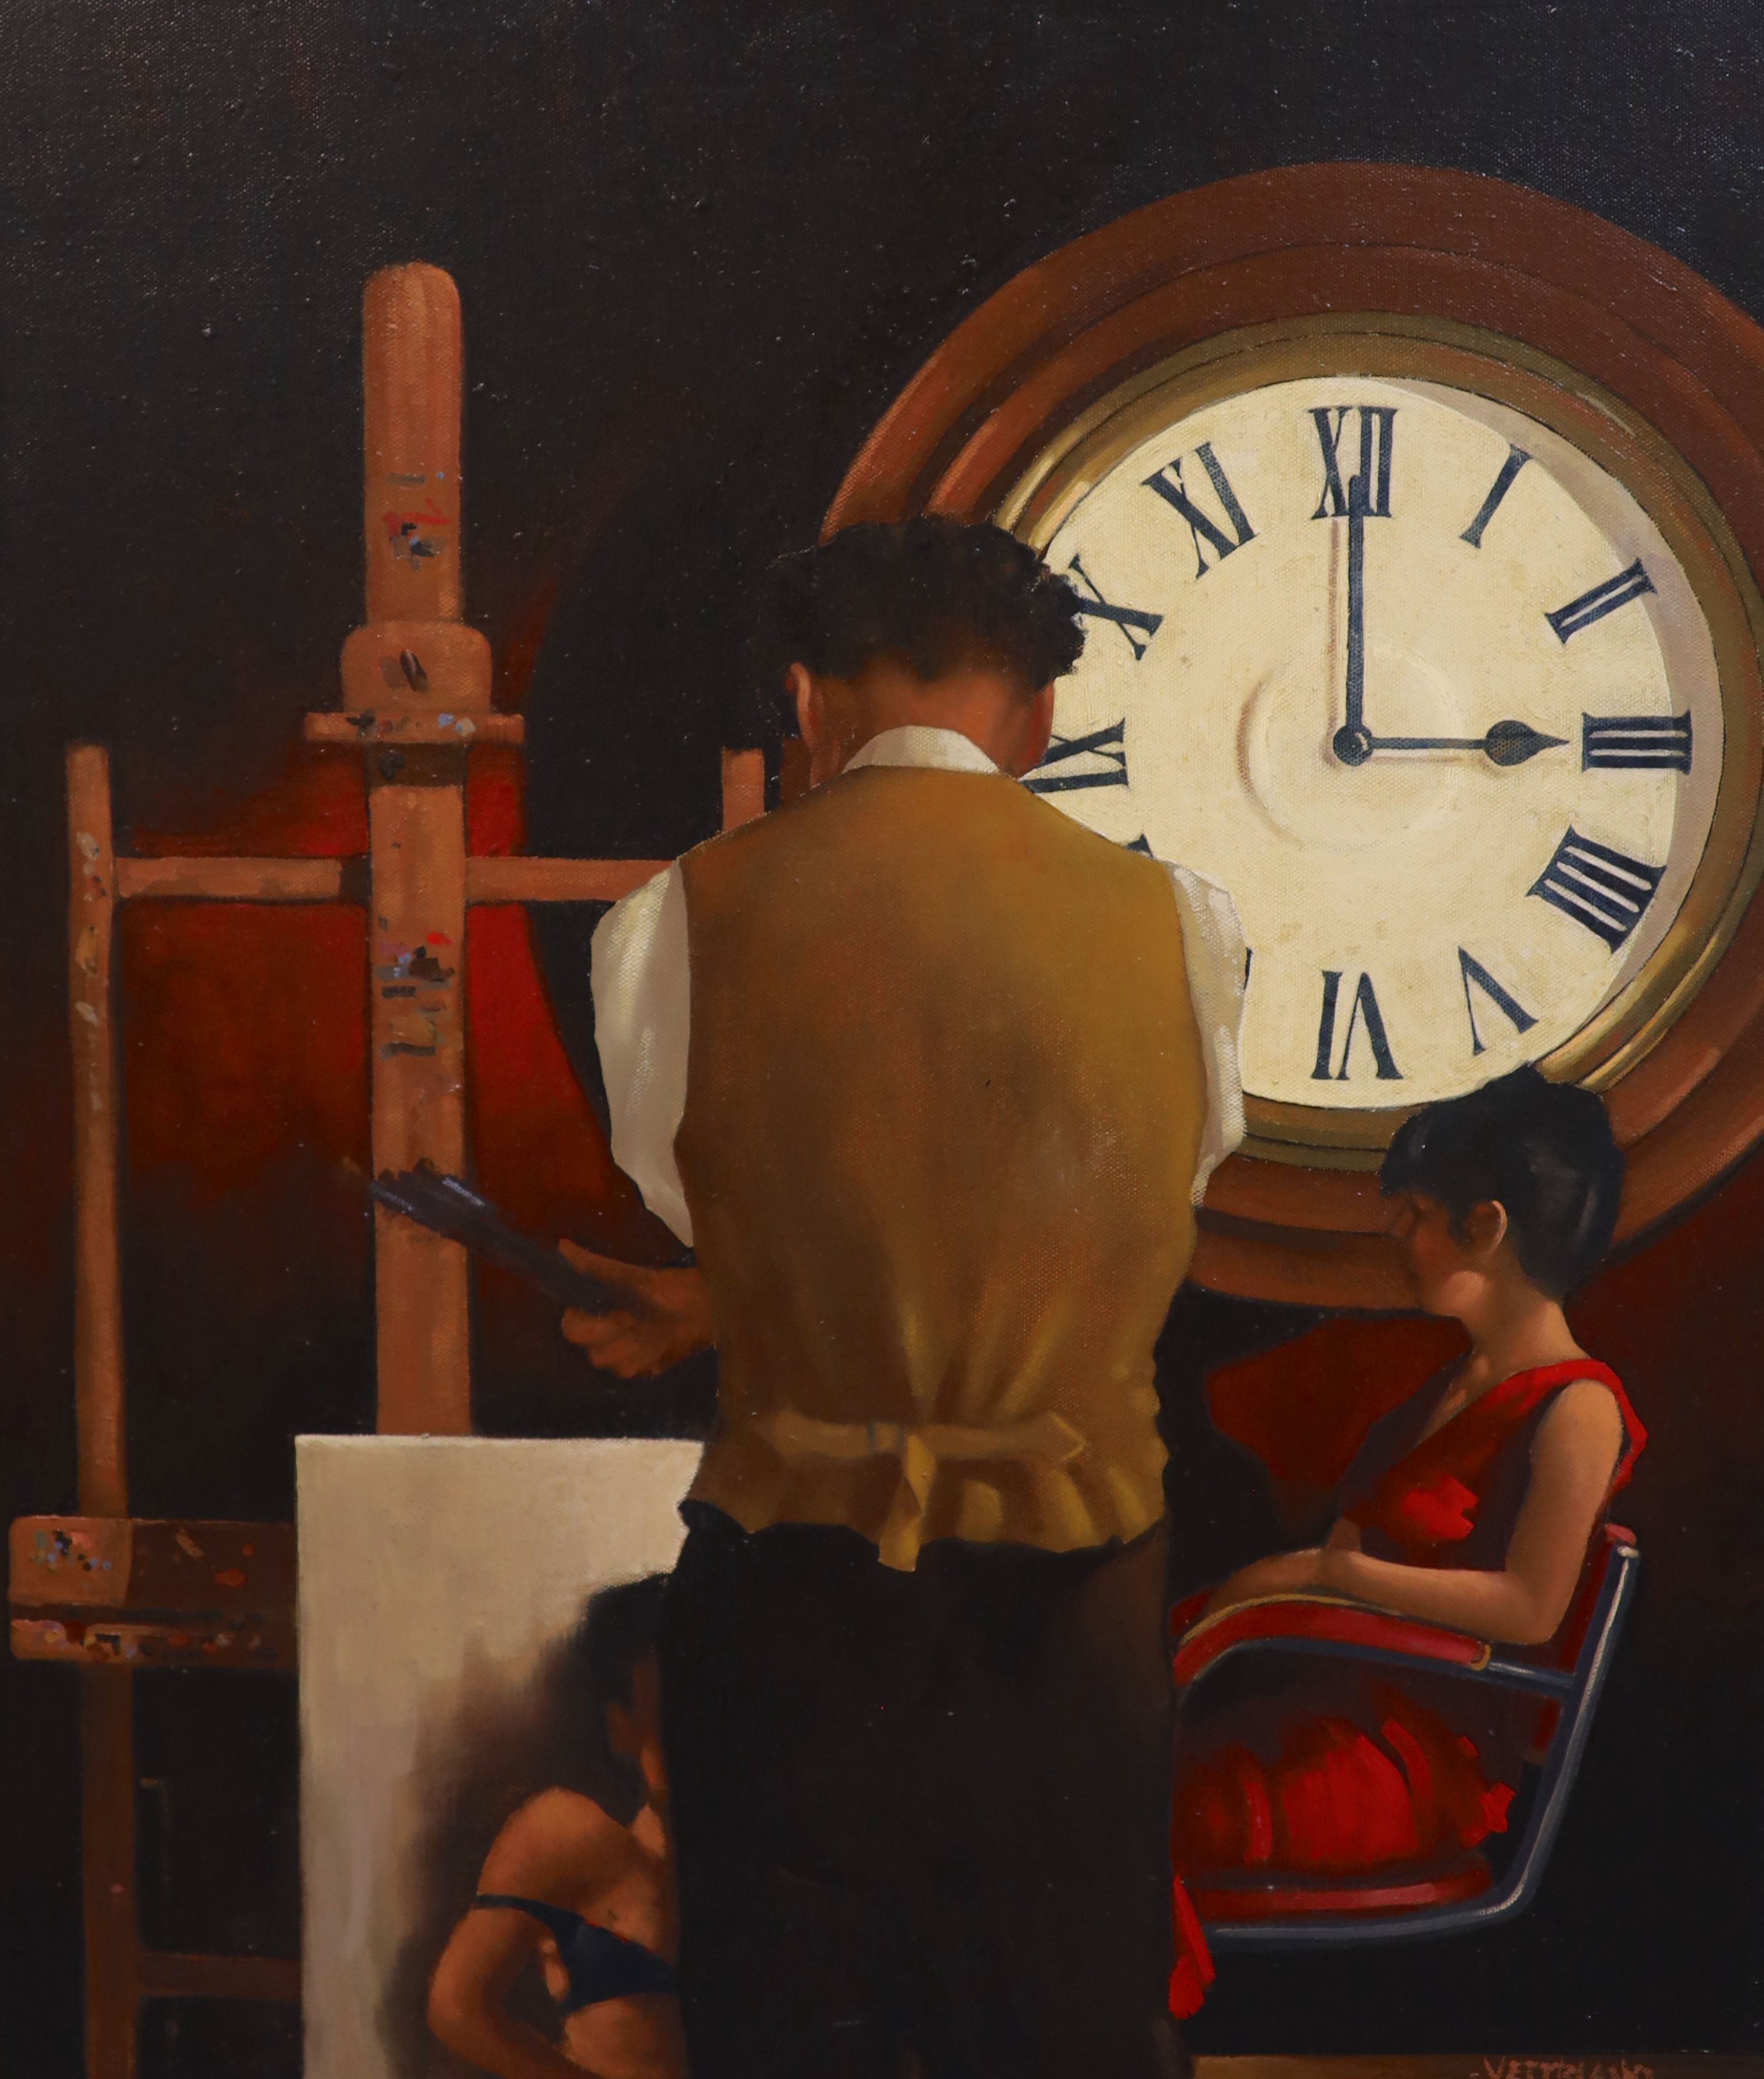 Jack Vettriano (1951-), 'The Critical Hour of 3am', oil on canvas, 61 x 50cm